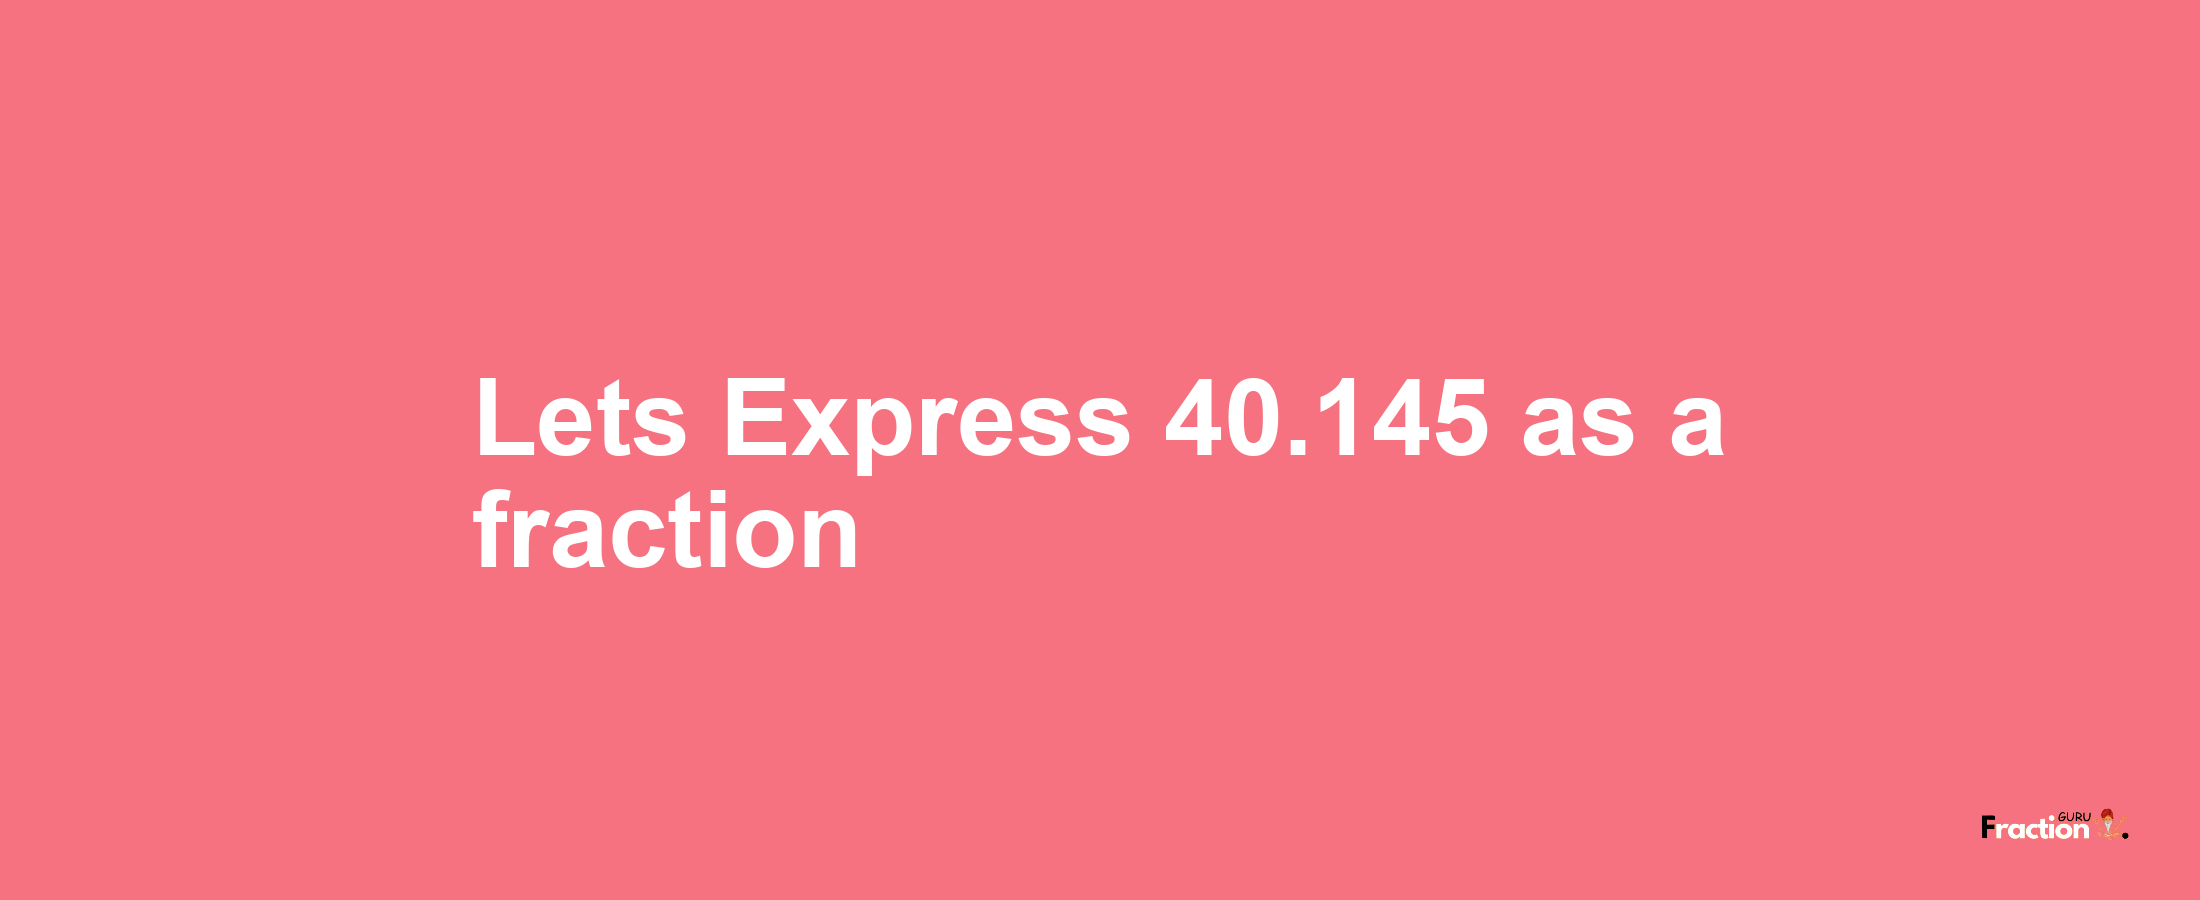 Lets Express 40.145 as afraction